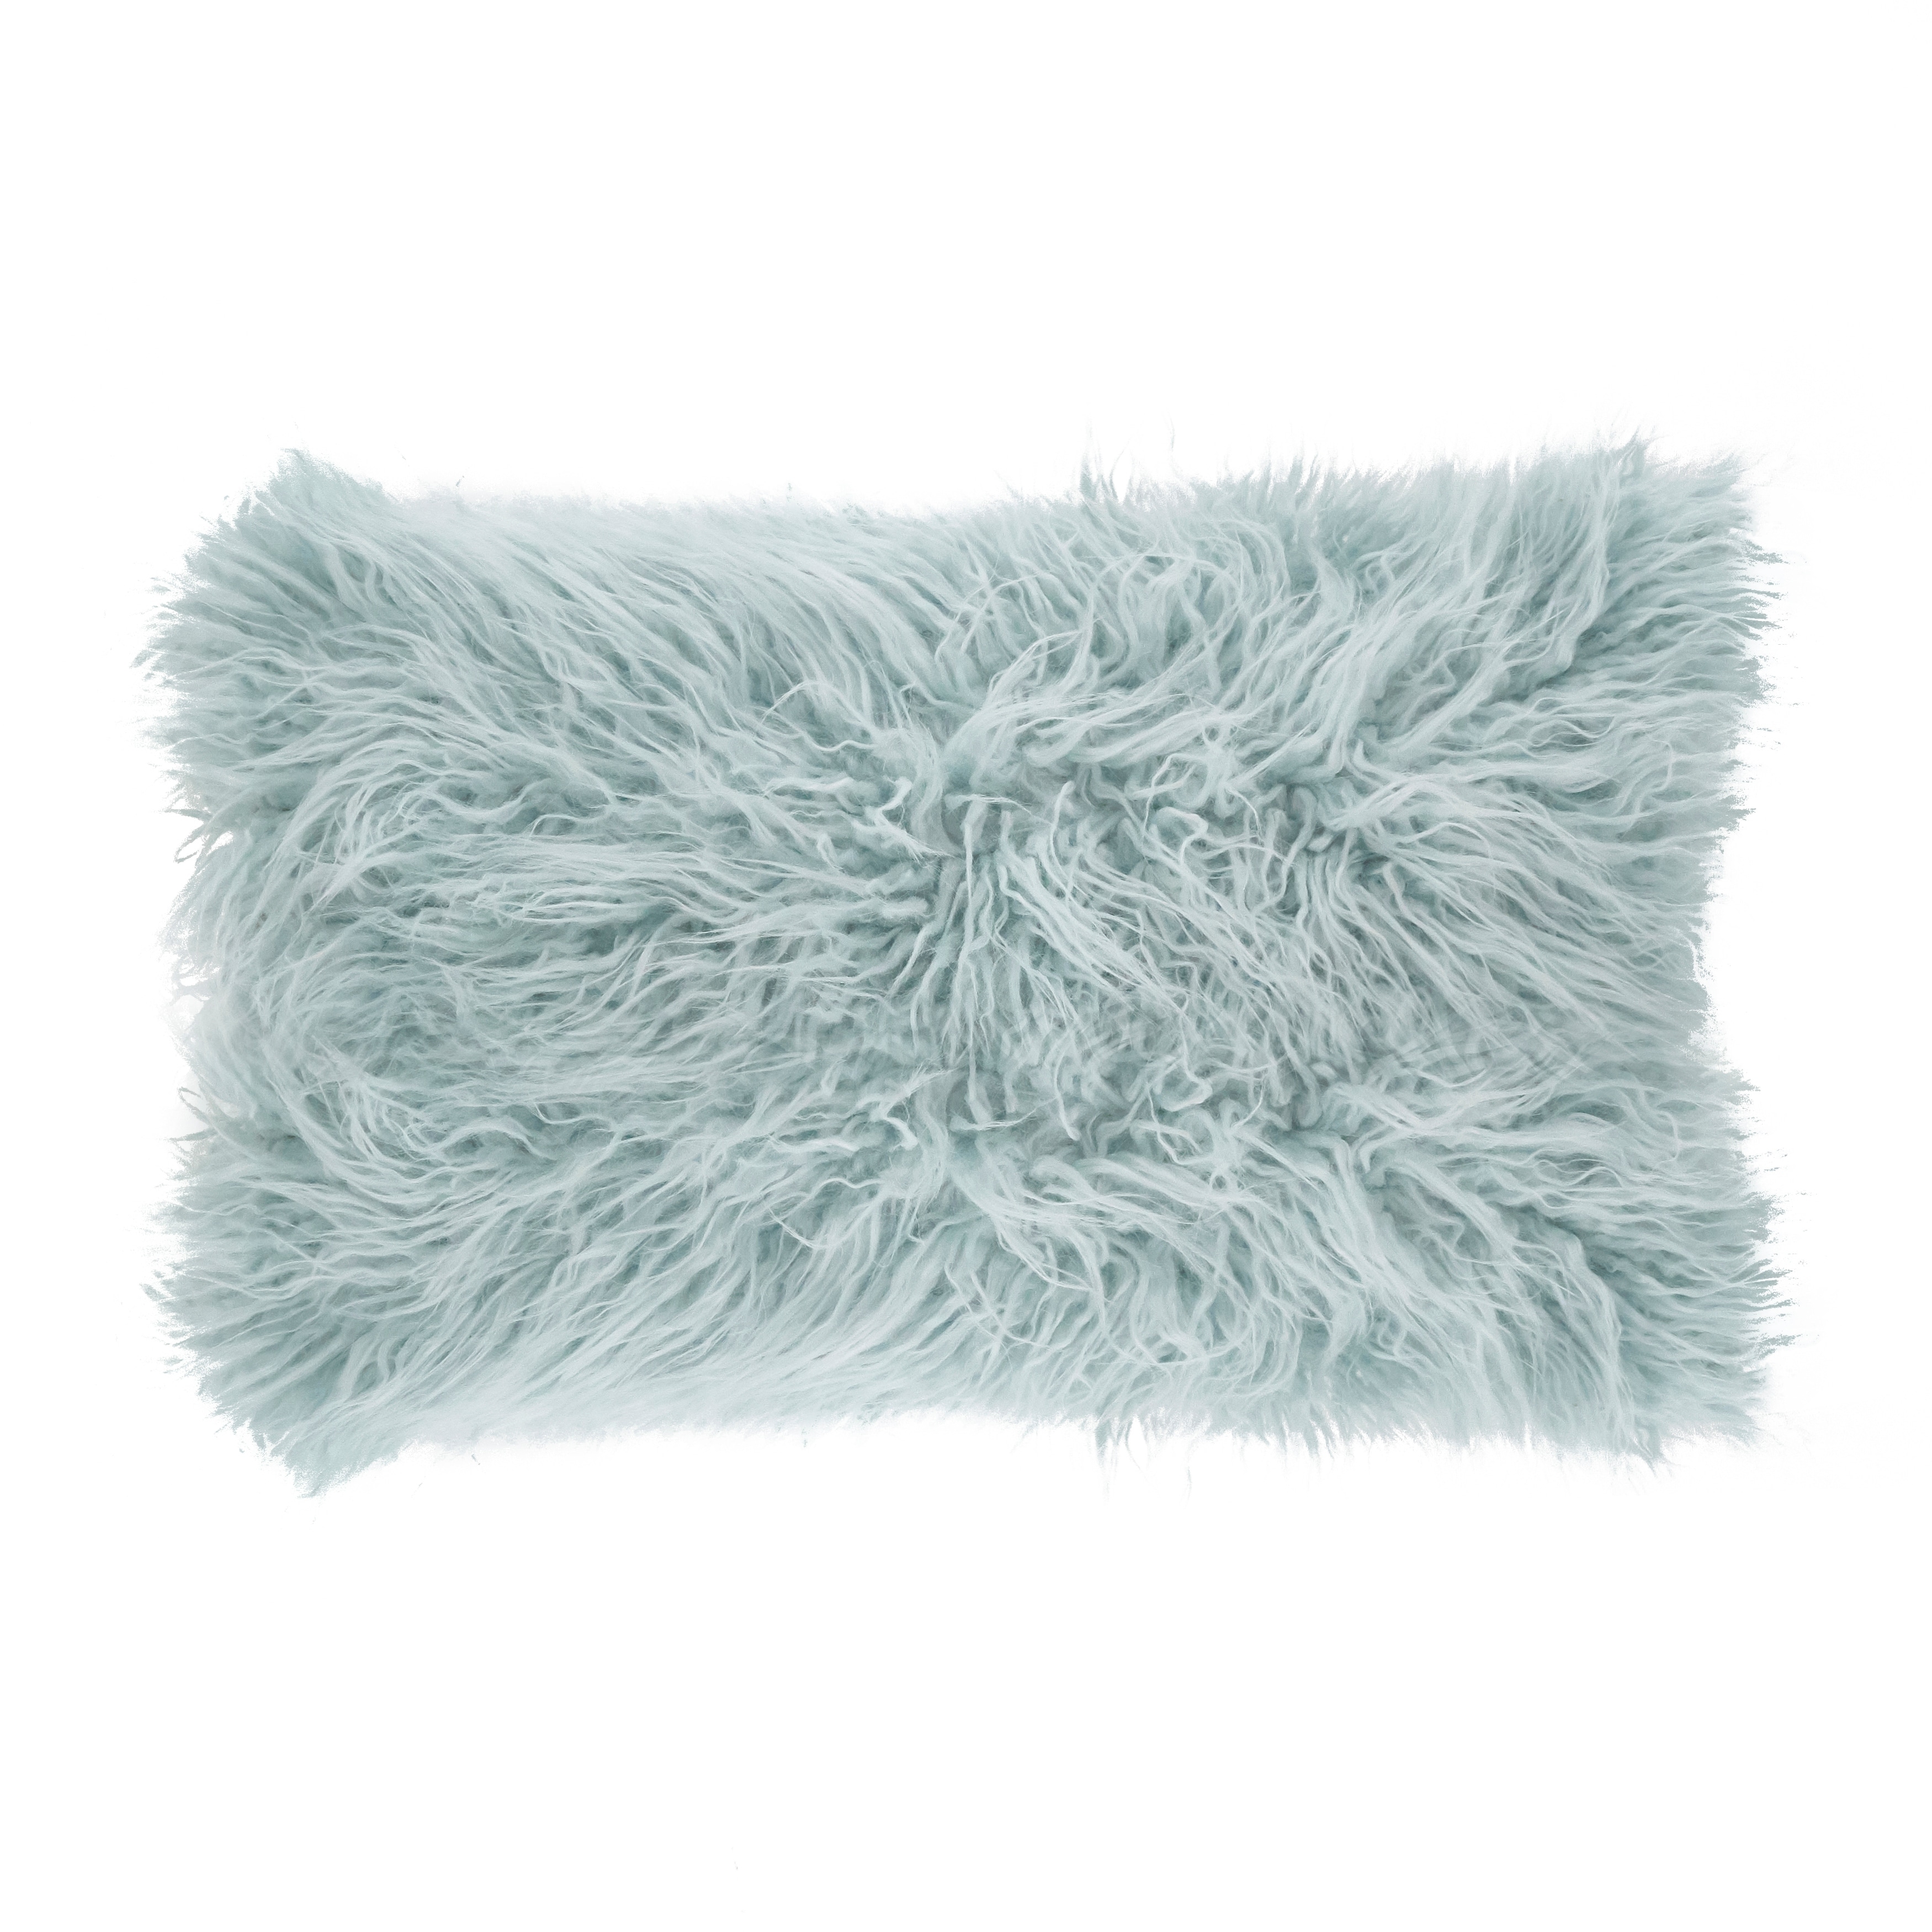 https://ak1.ostkcdn.com/images/products/is/images/direct/336e09047df3502cb16f8d683b1f731eb7412571/Mongolian-Faux-Fur-Throw-Pillow.jpg